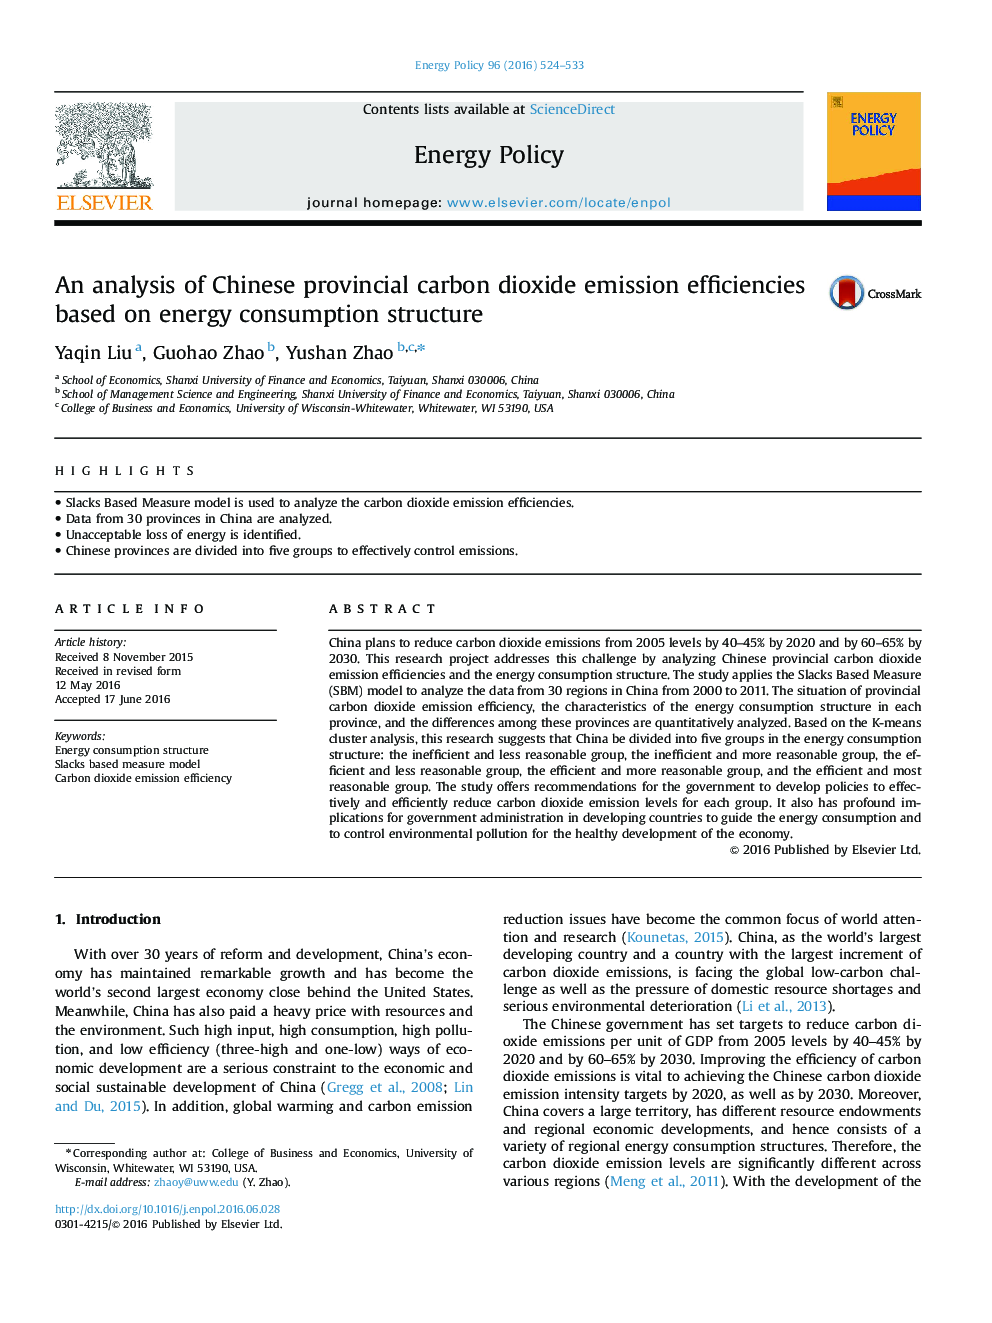 An analysis of Chinese provincial carbon dioxide emission efficiencies based on energy consumption structure